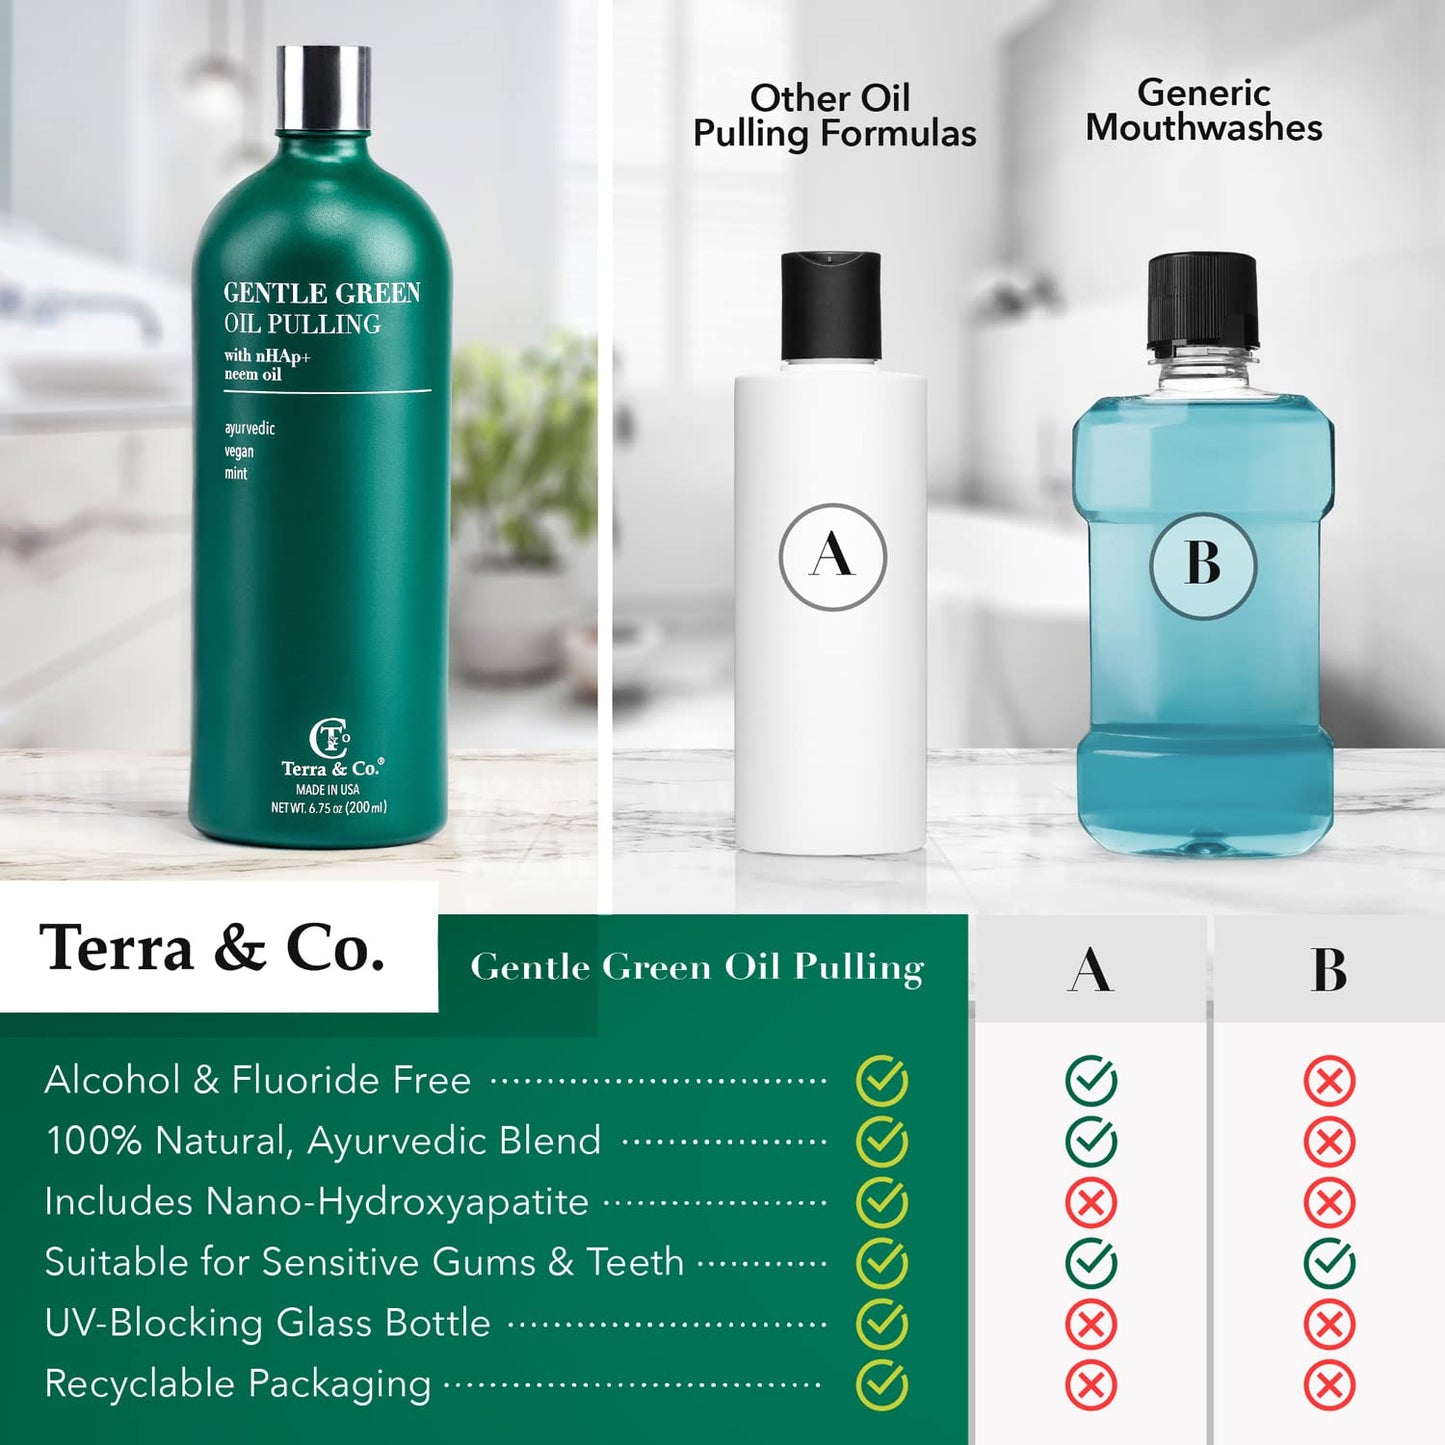 Terra & Co. Gentle Ayurveda Oil Pulling for Teeth and Gums - Vegan Natural Mouthwash No Alcohol or Fluoride to Improve Oral Health - Made with Cold Pressed Plant Oils and Nano Hydroxyapatite - 200ml